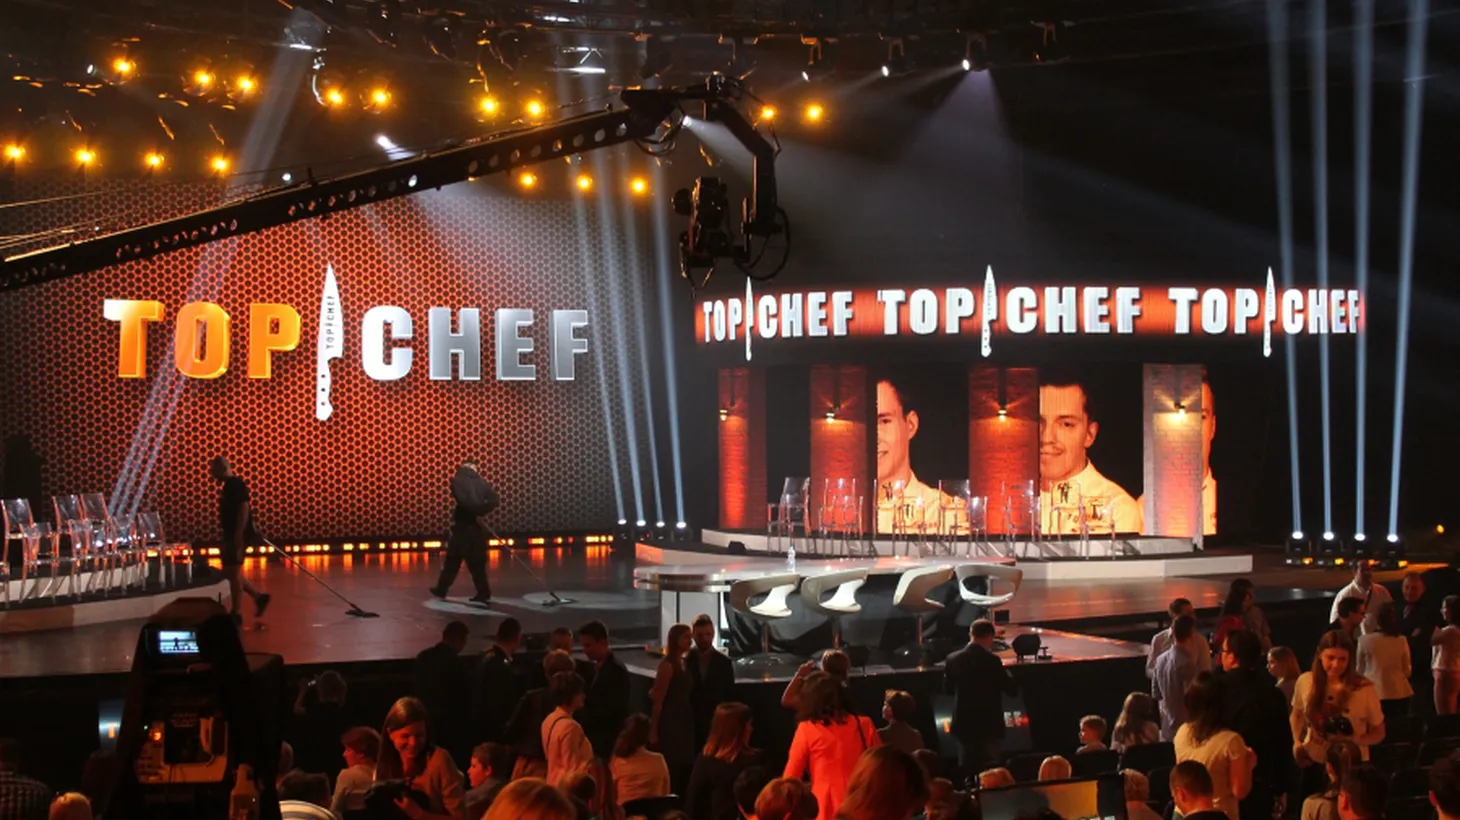 The 21st season of "Top Chef" airs on Bravo this March.